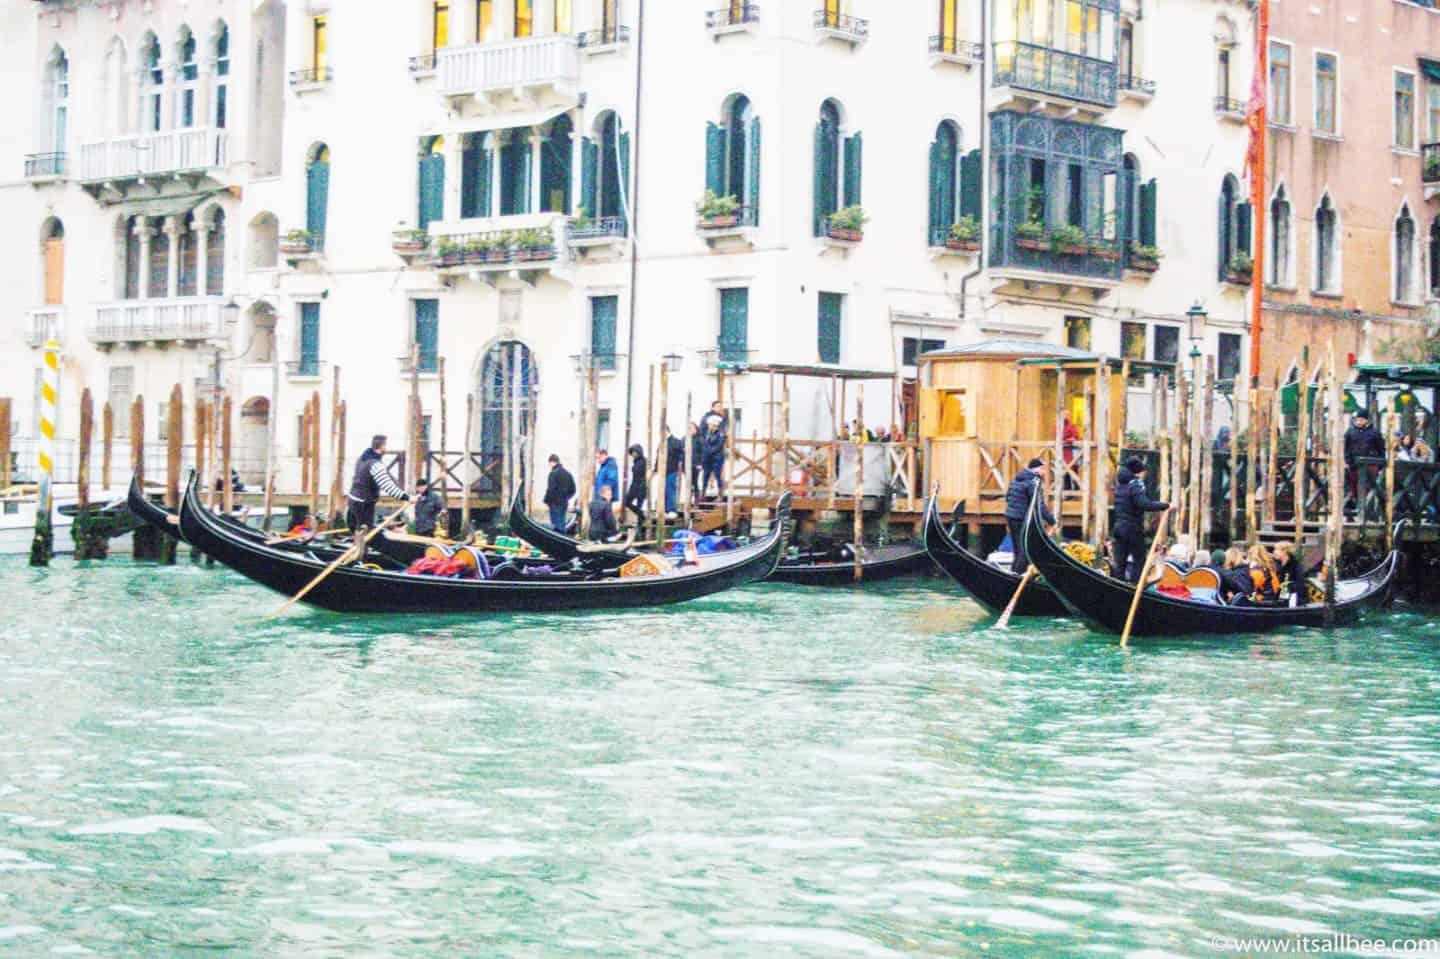 Venice Water Taxi Costs and Plus How To Save Money On Venice Water Taxis